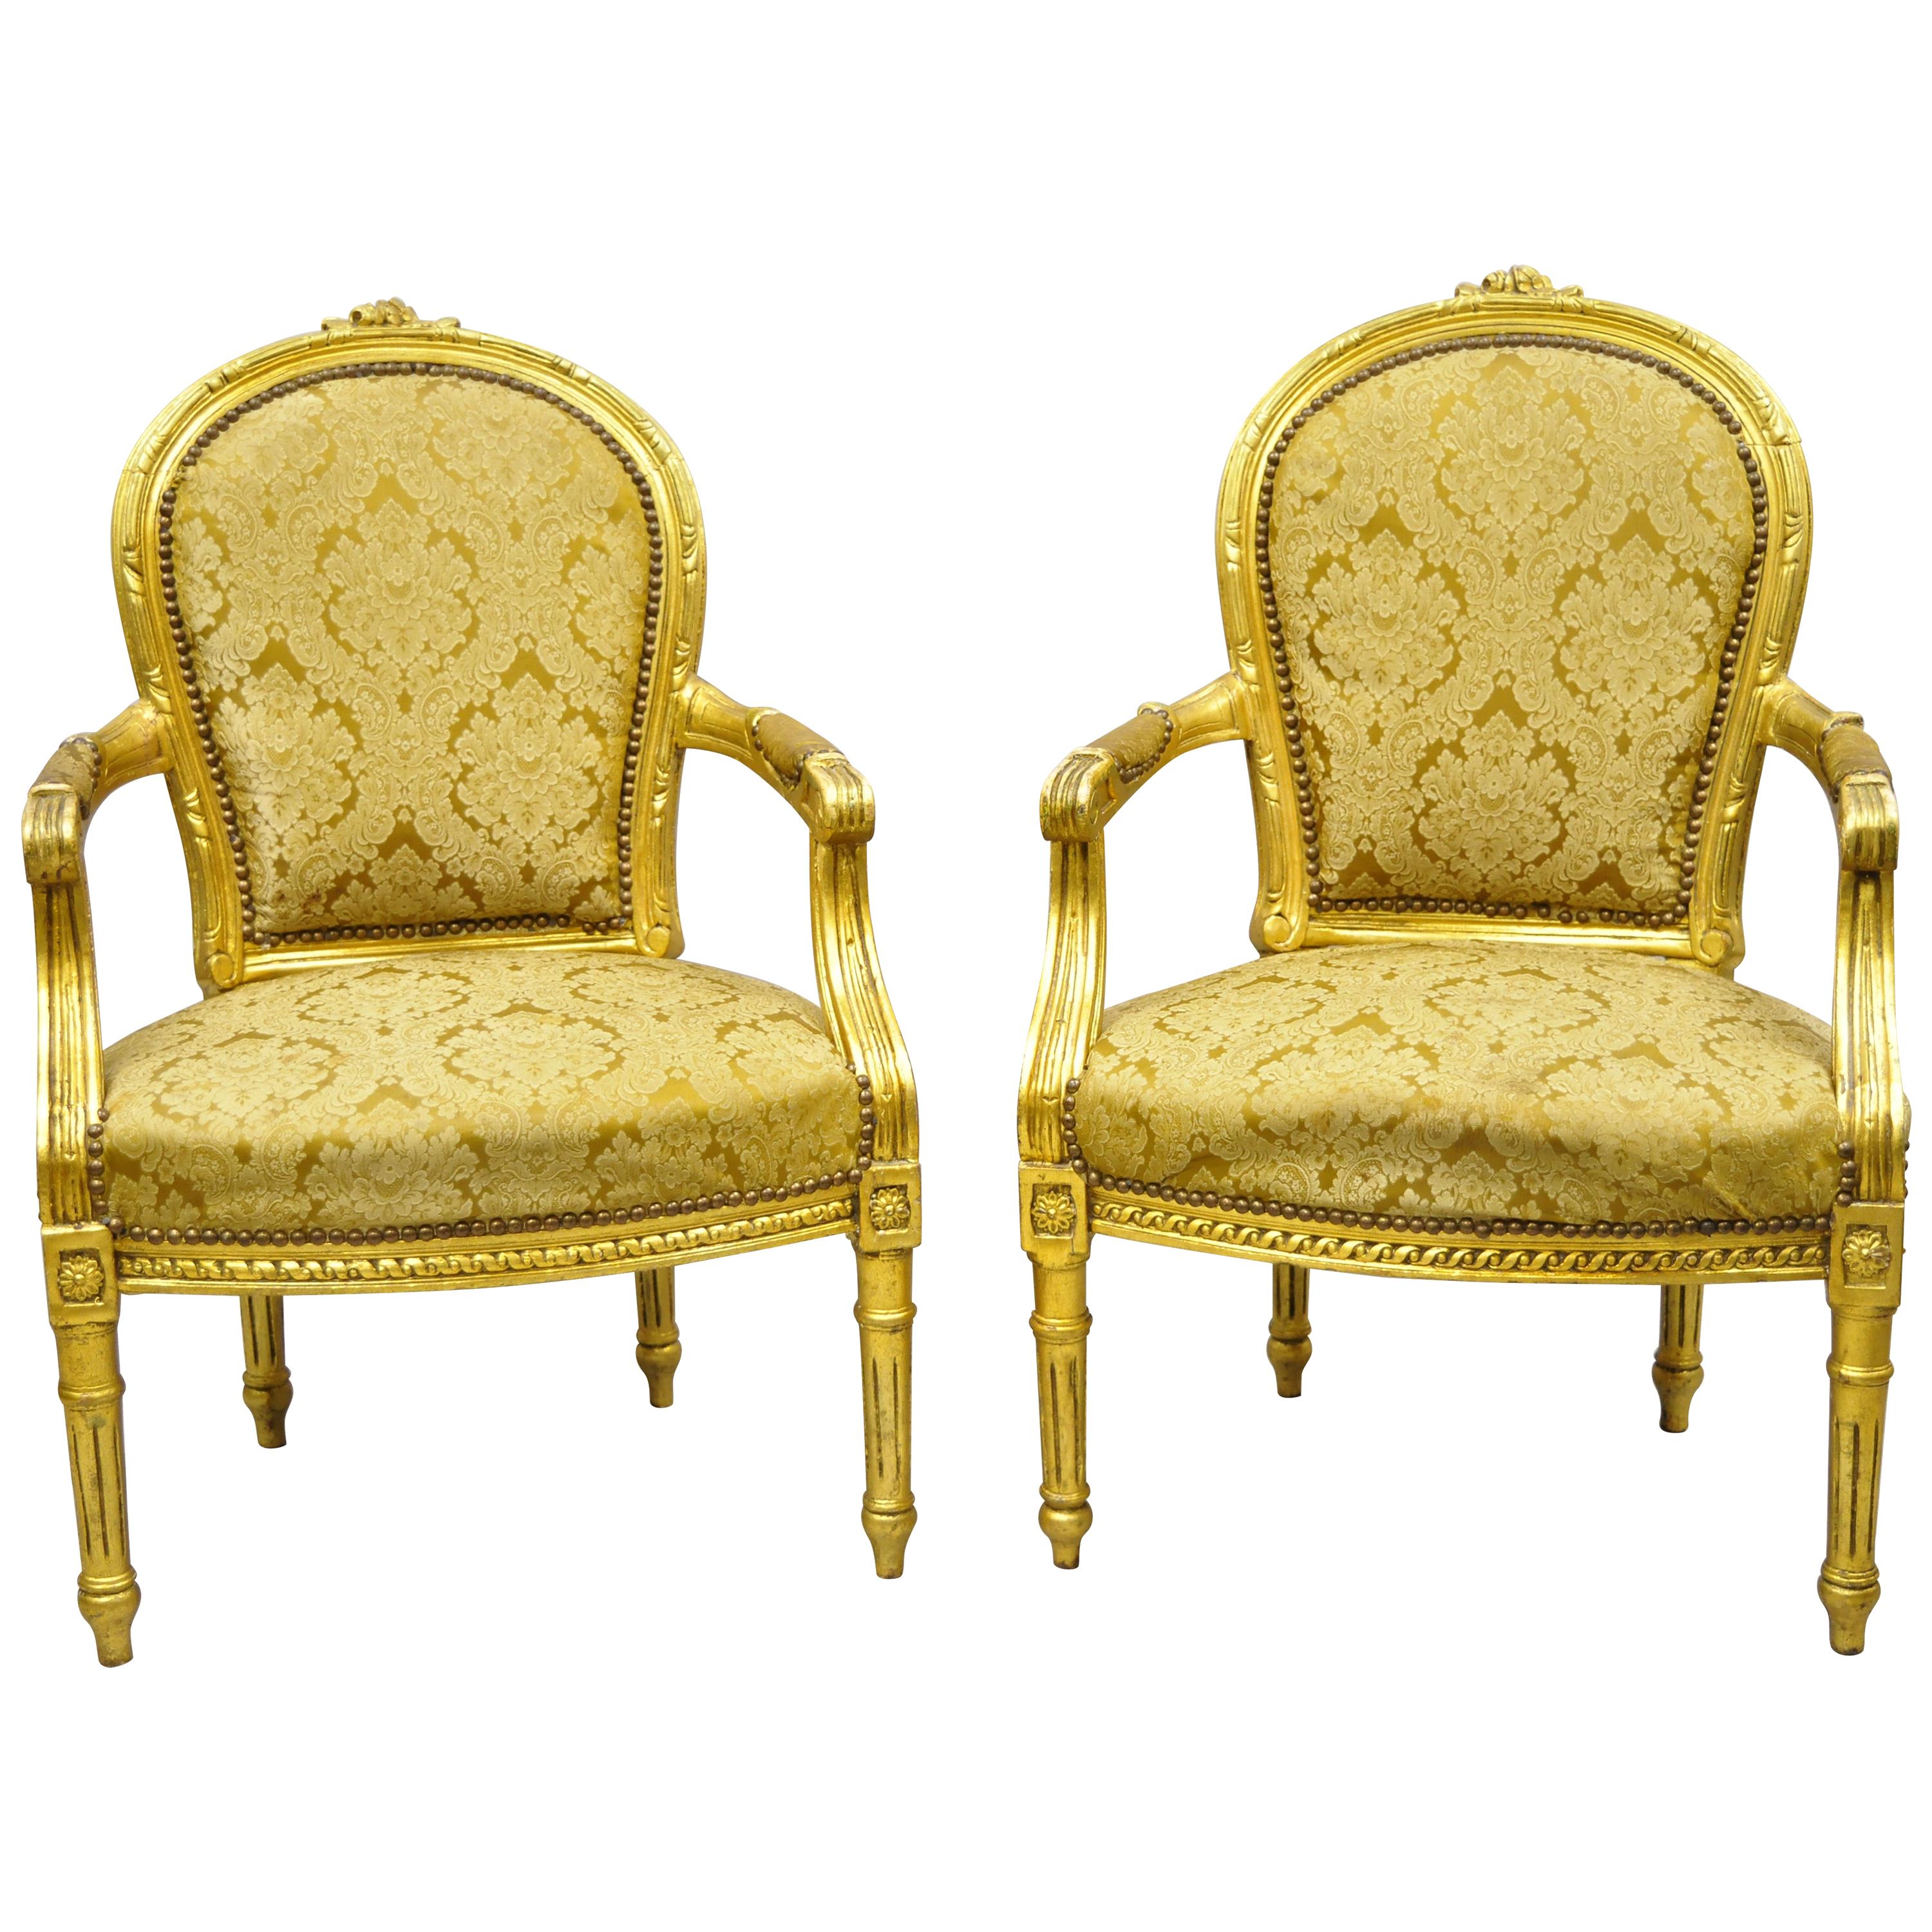 Vintage French Louis XVI Gold Leaf Balloon Back Fauteuil Armchairs, a Pair